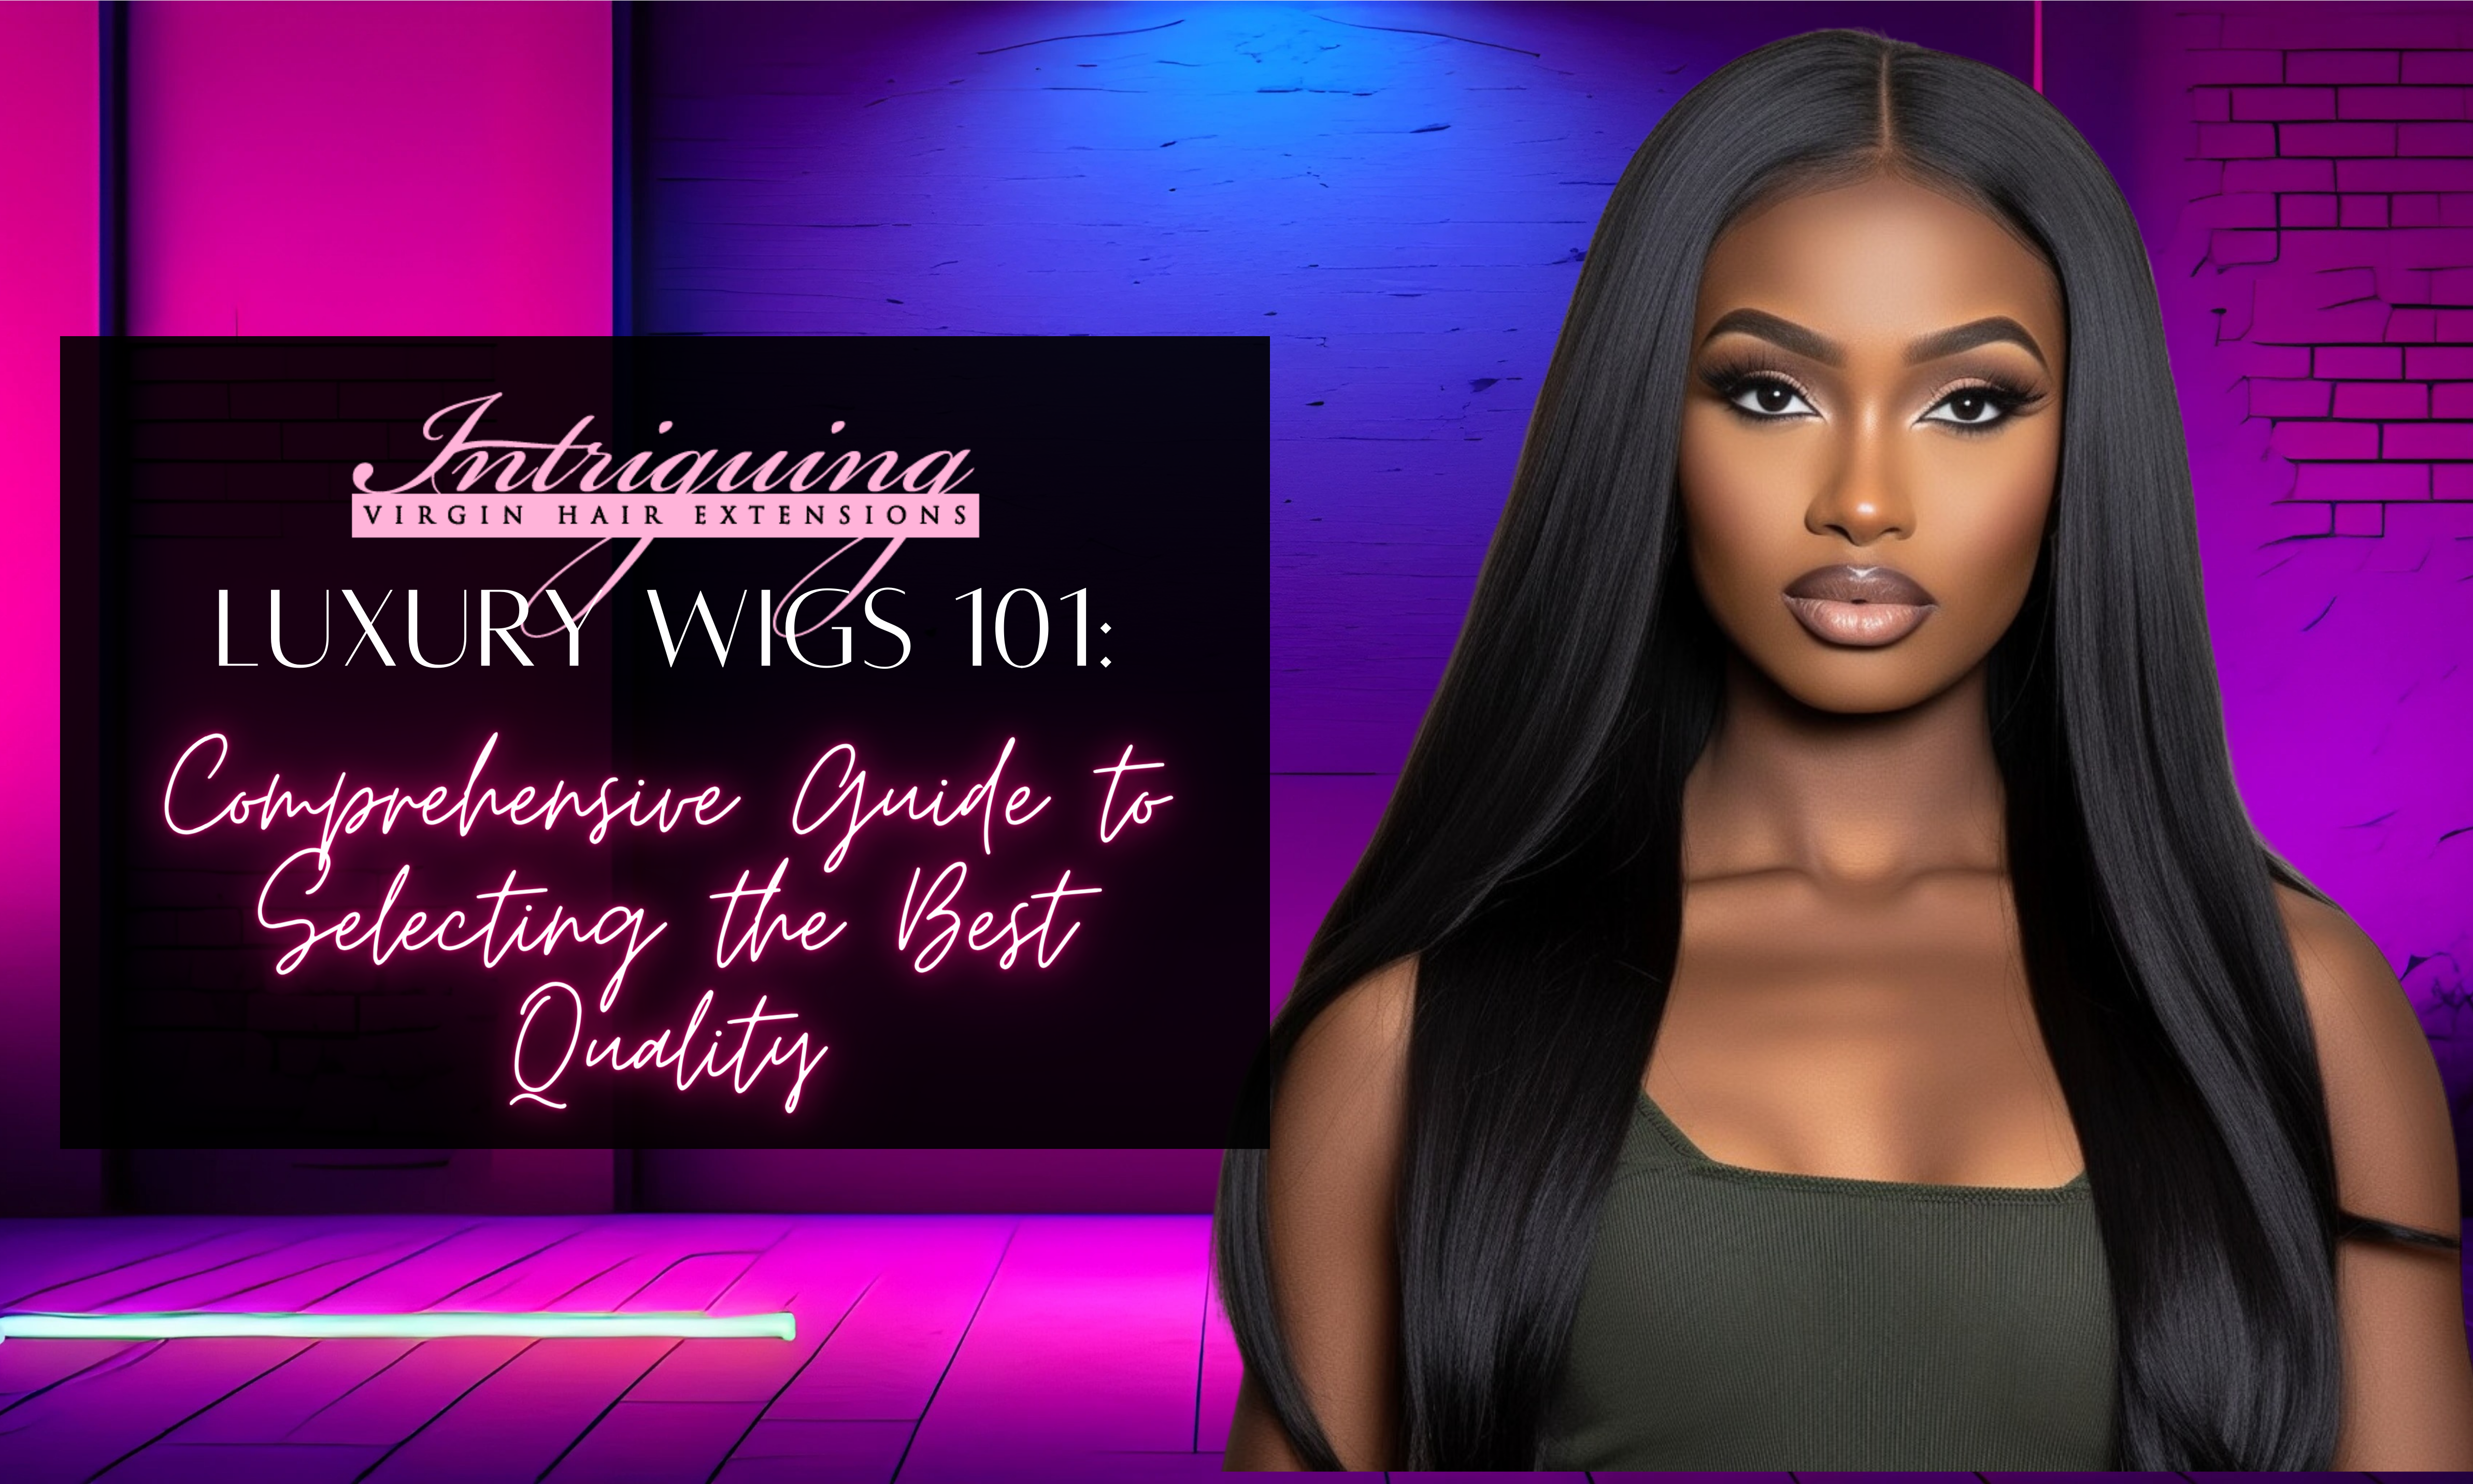 Luxury Wigs 101: Comprehensive Guide to Selecting the Best Quality